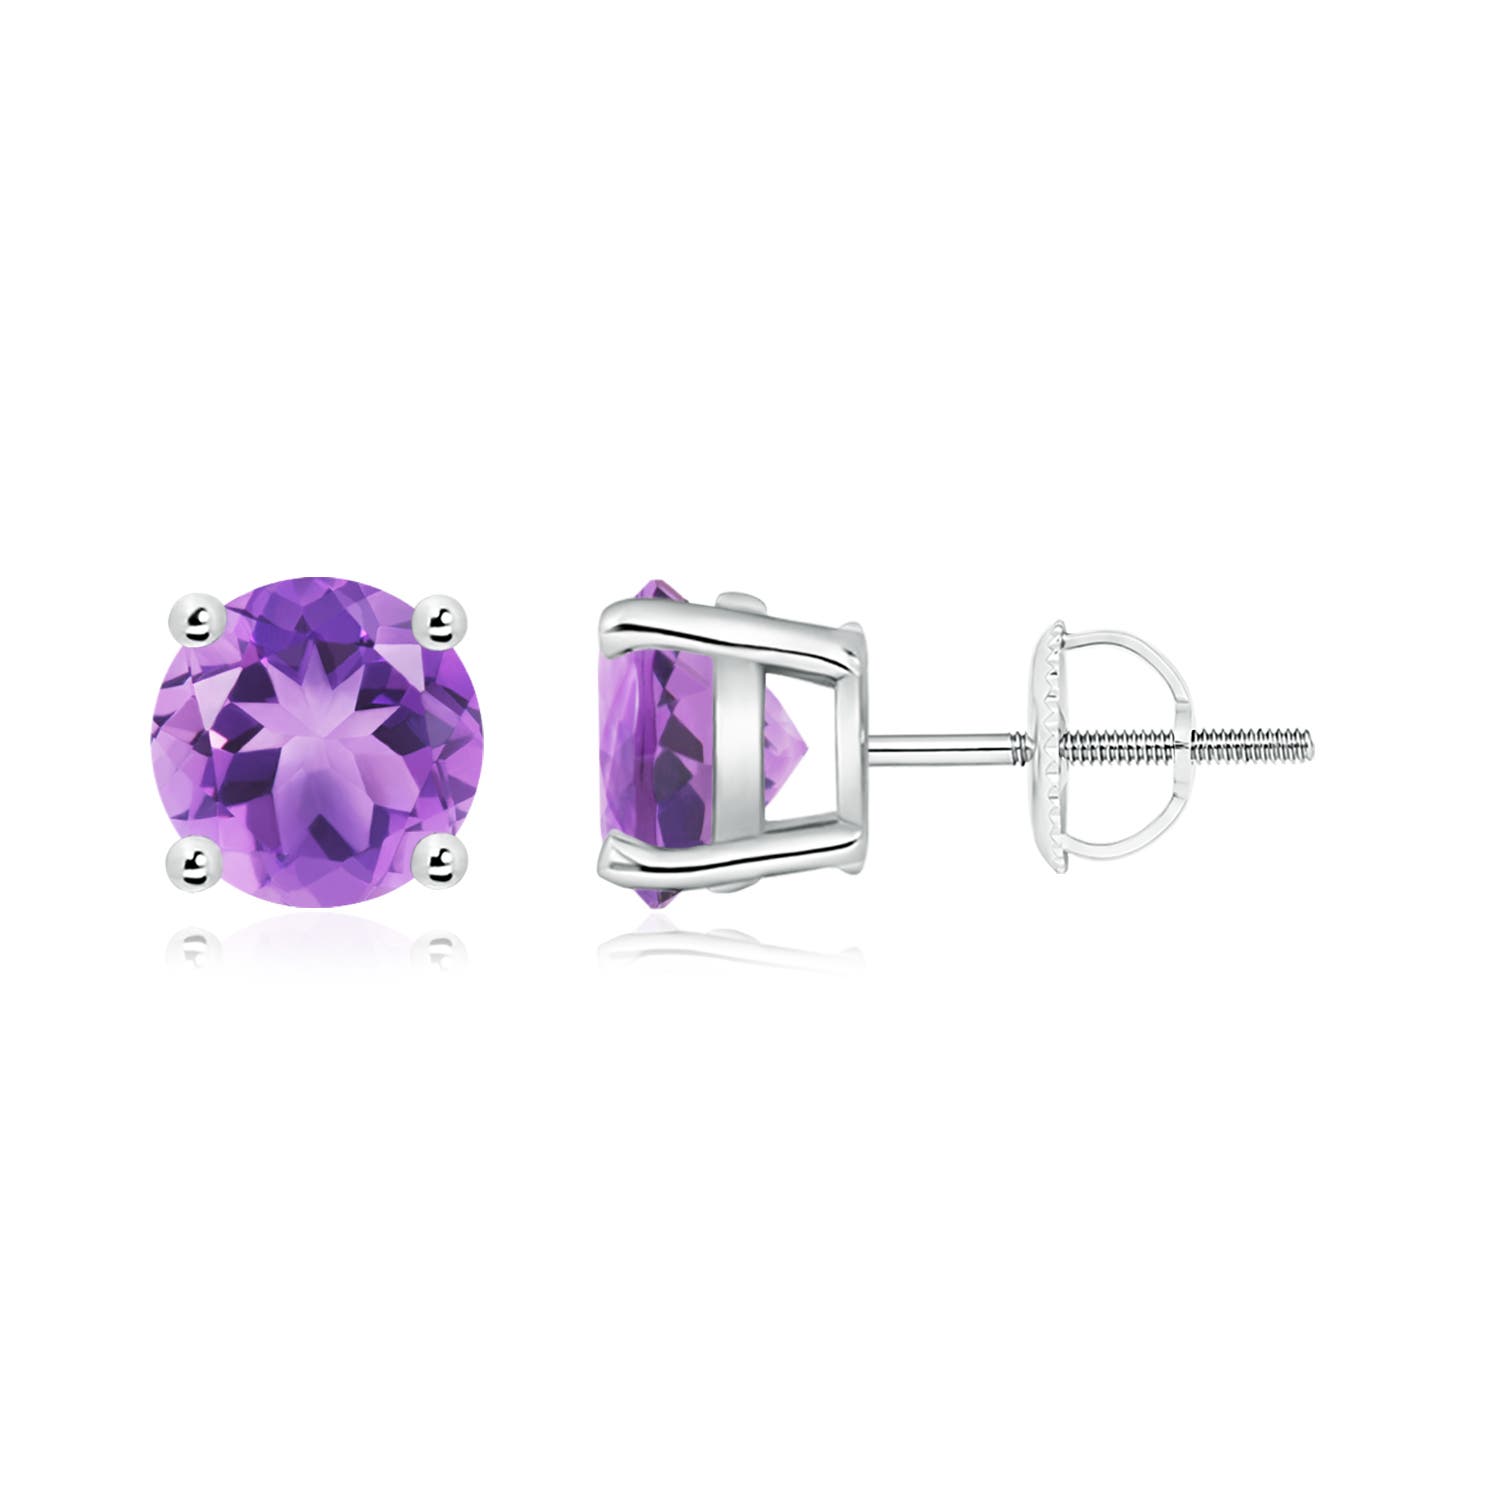 A - Amethyst / 2.3 CT / 14 KT White Gold